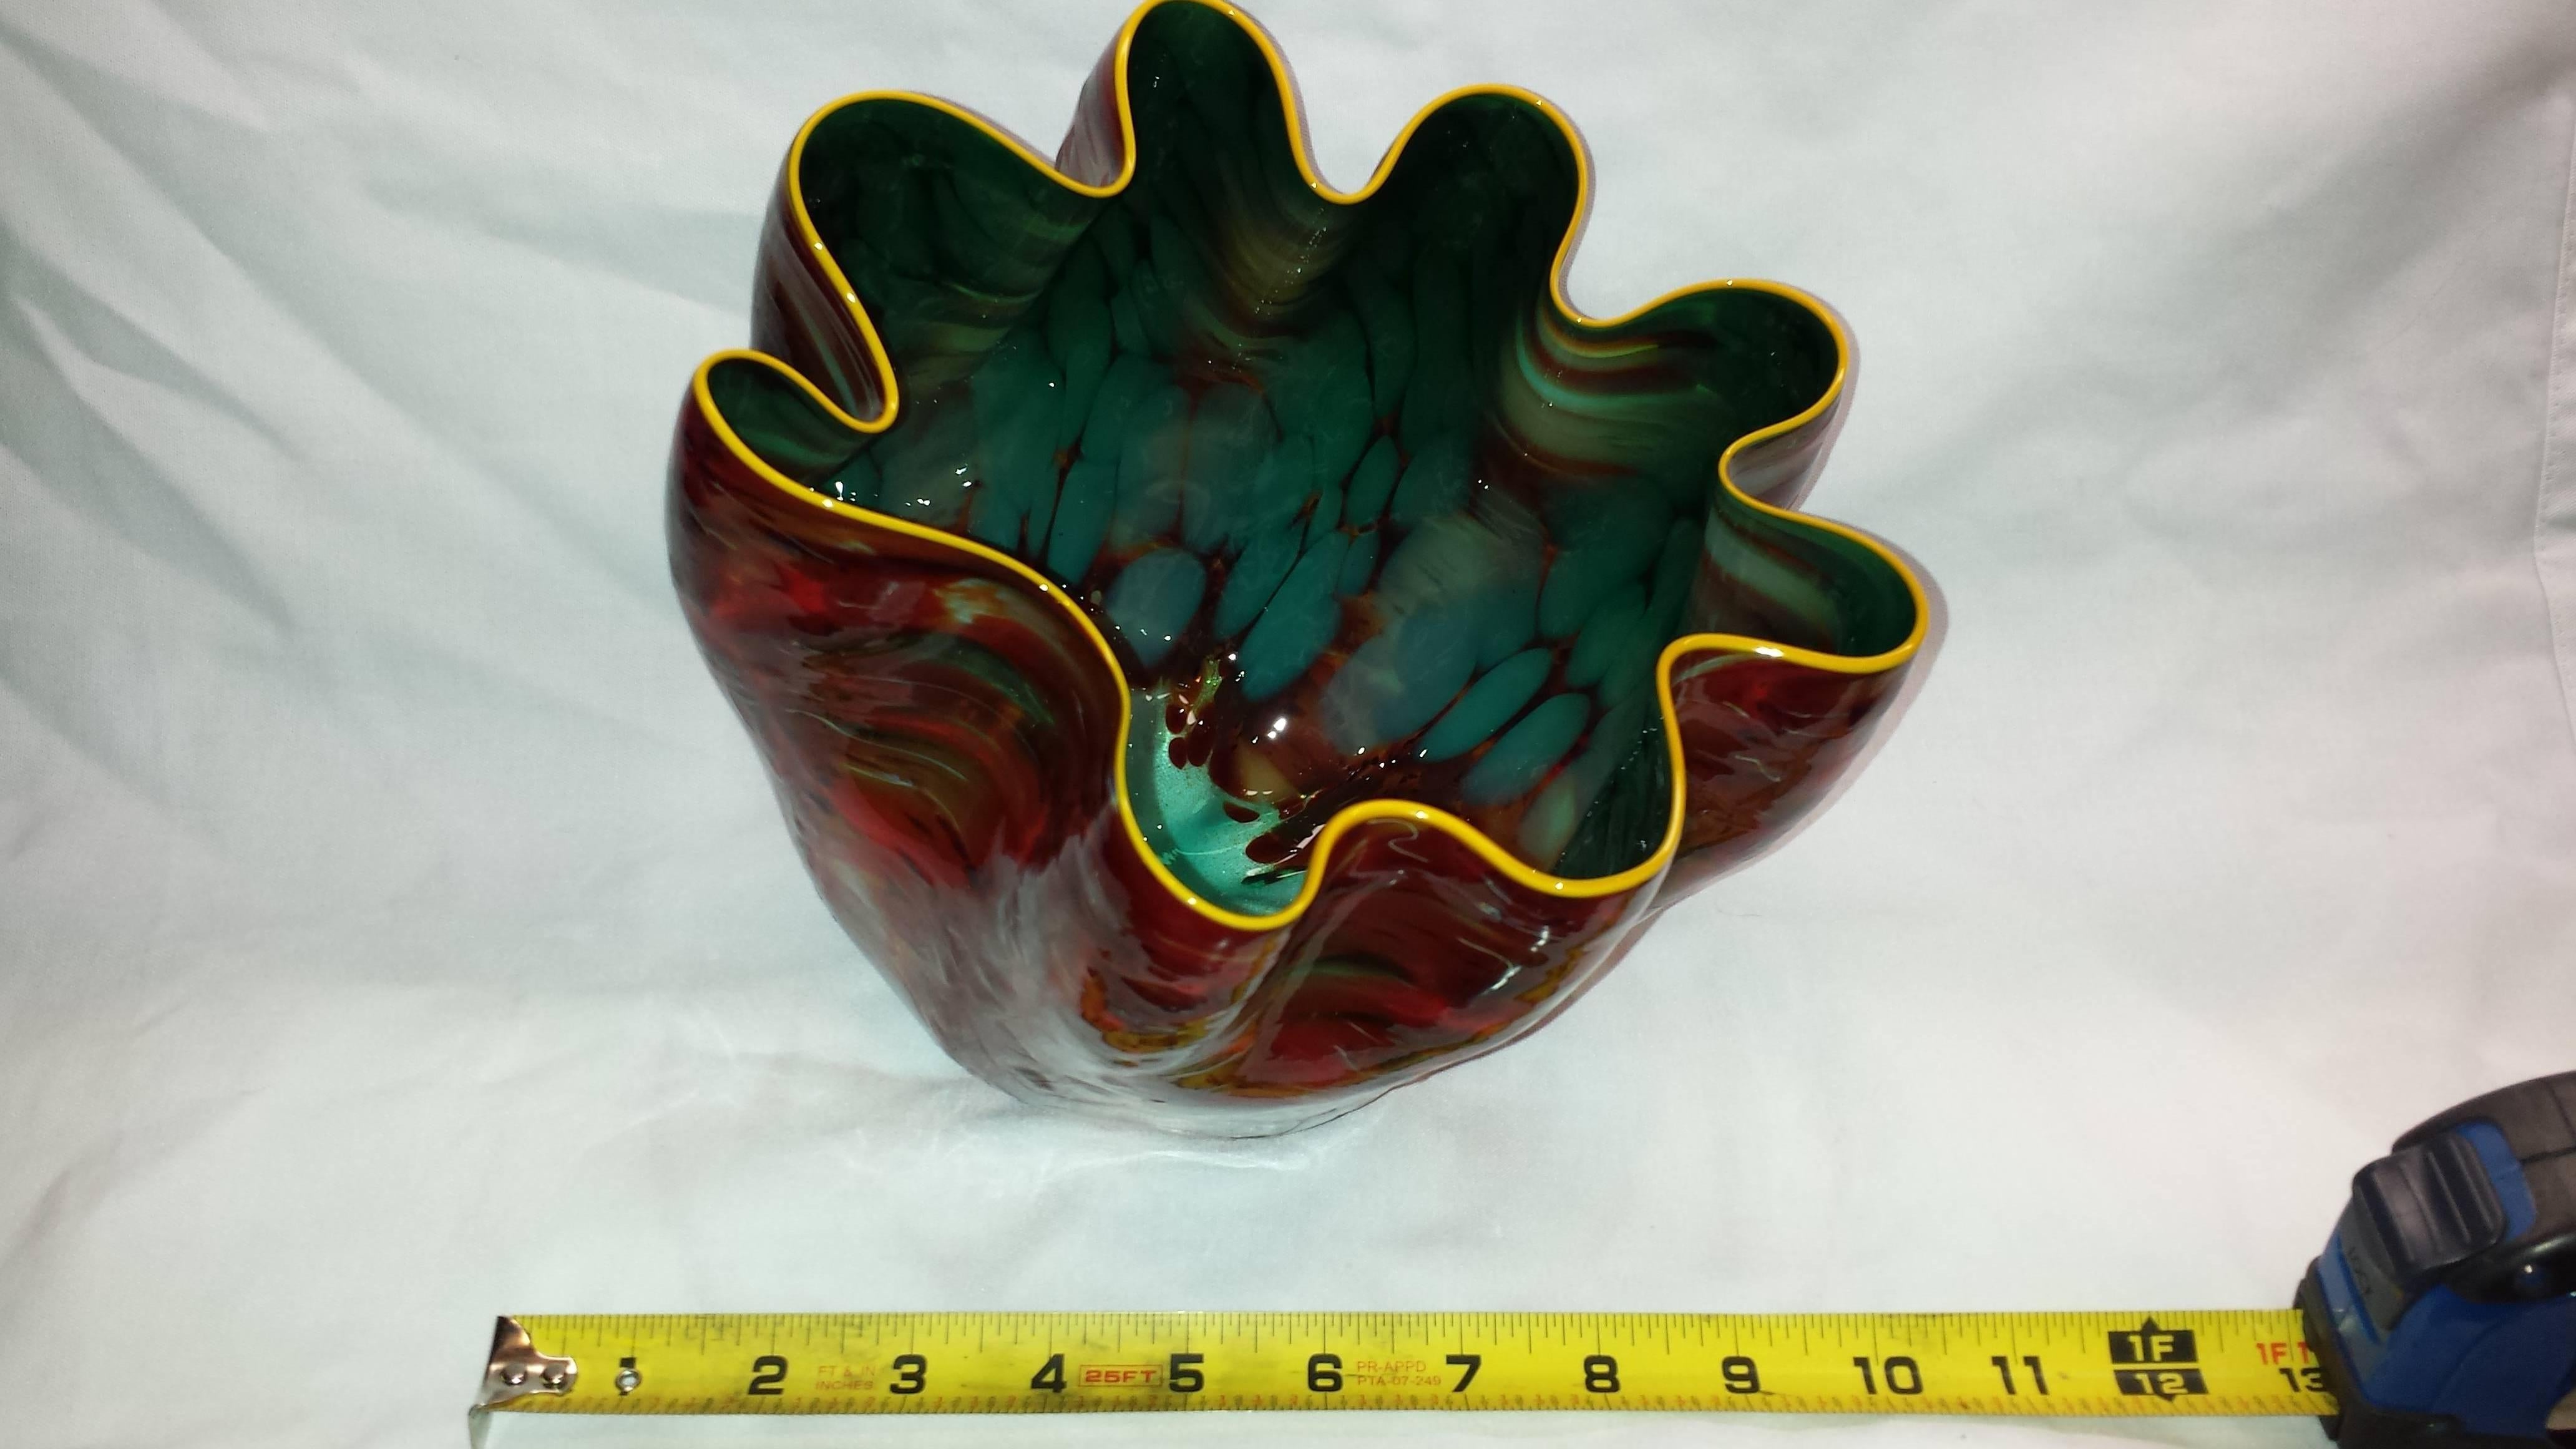 Organic Modern Dale Chihuly, Firefly Macchia for Portland Press, Studio Edition, 2008, Signed